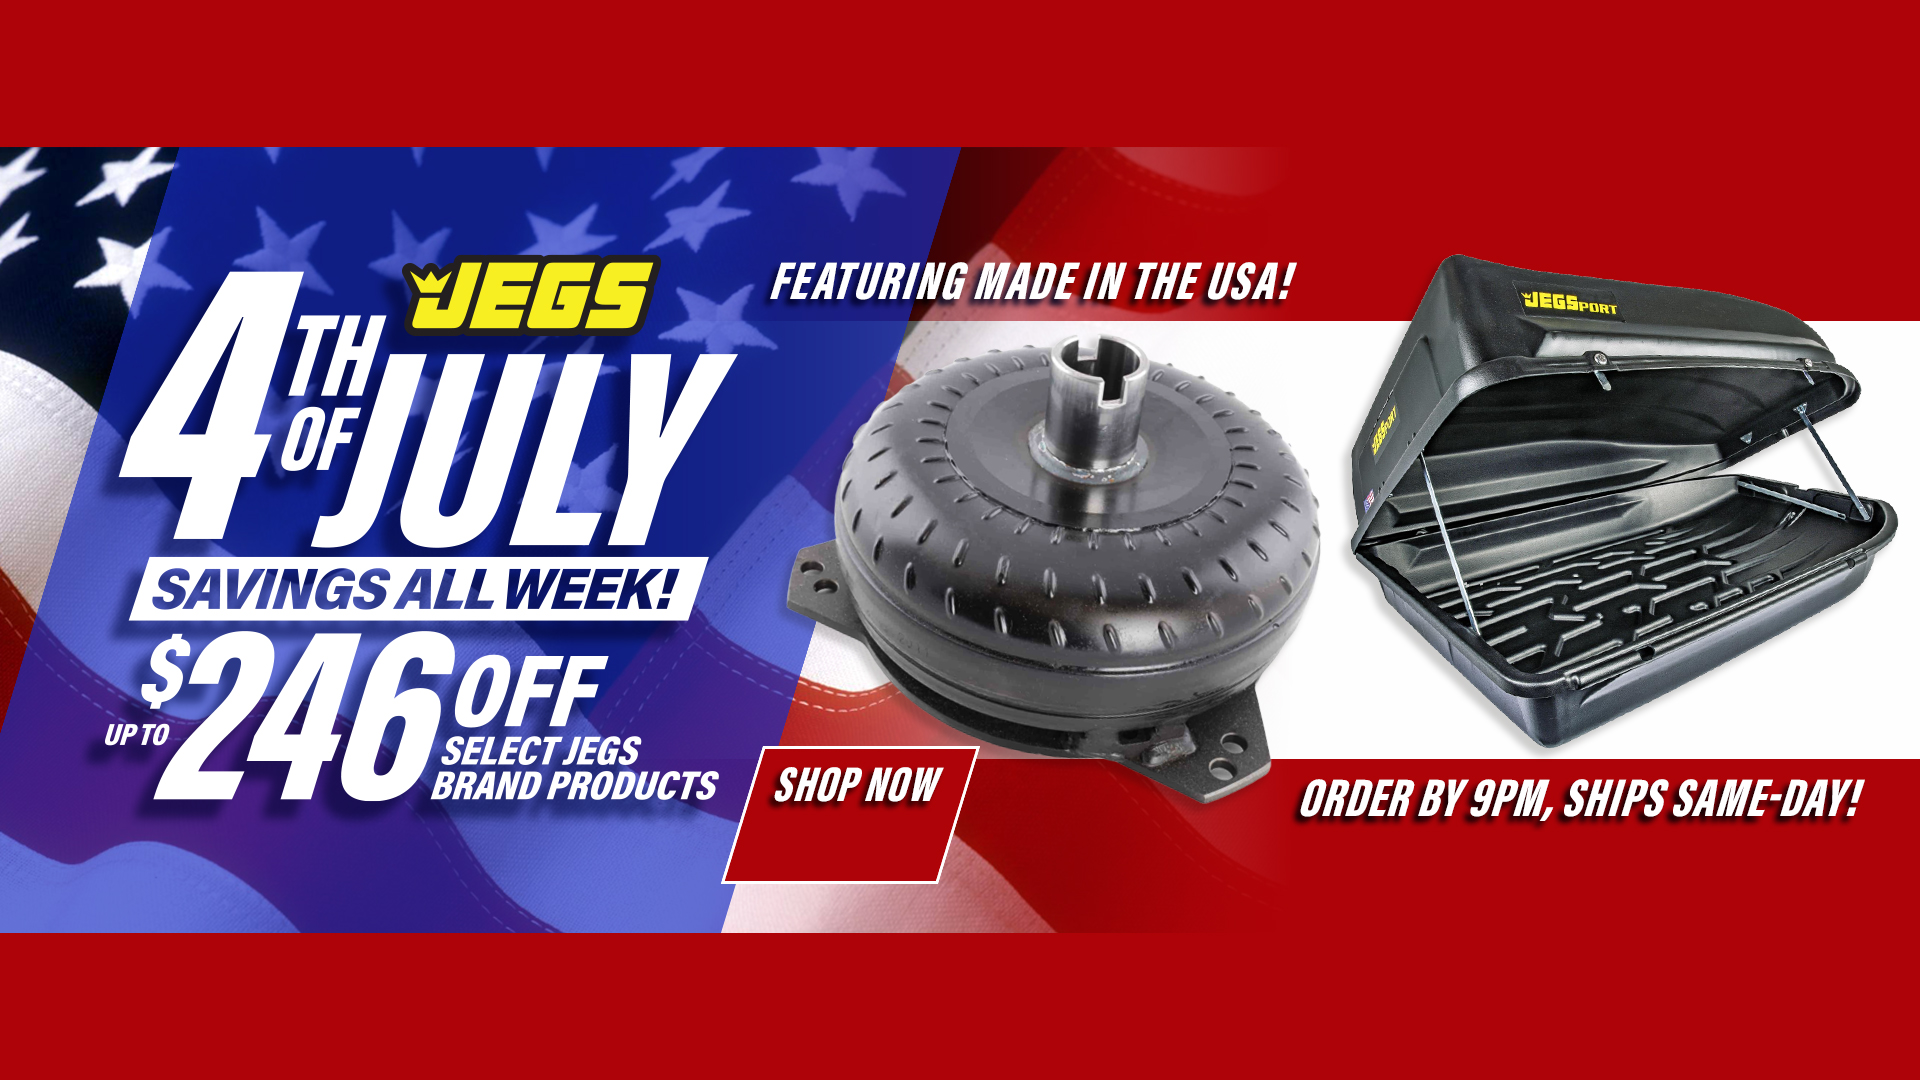 JEGS 4th of July Savings All Week Up to $246 Off Select JEGS Brand Products